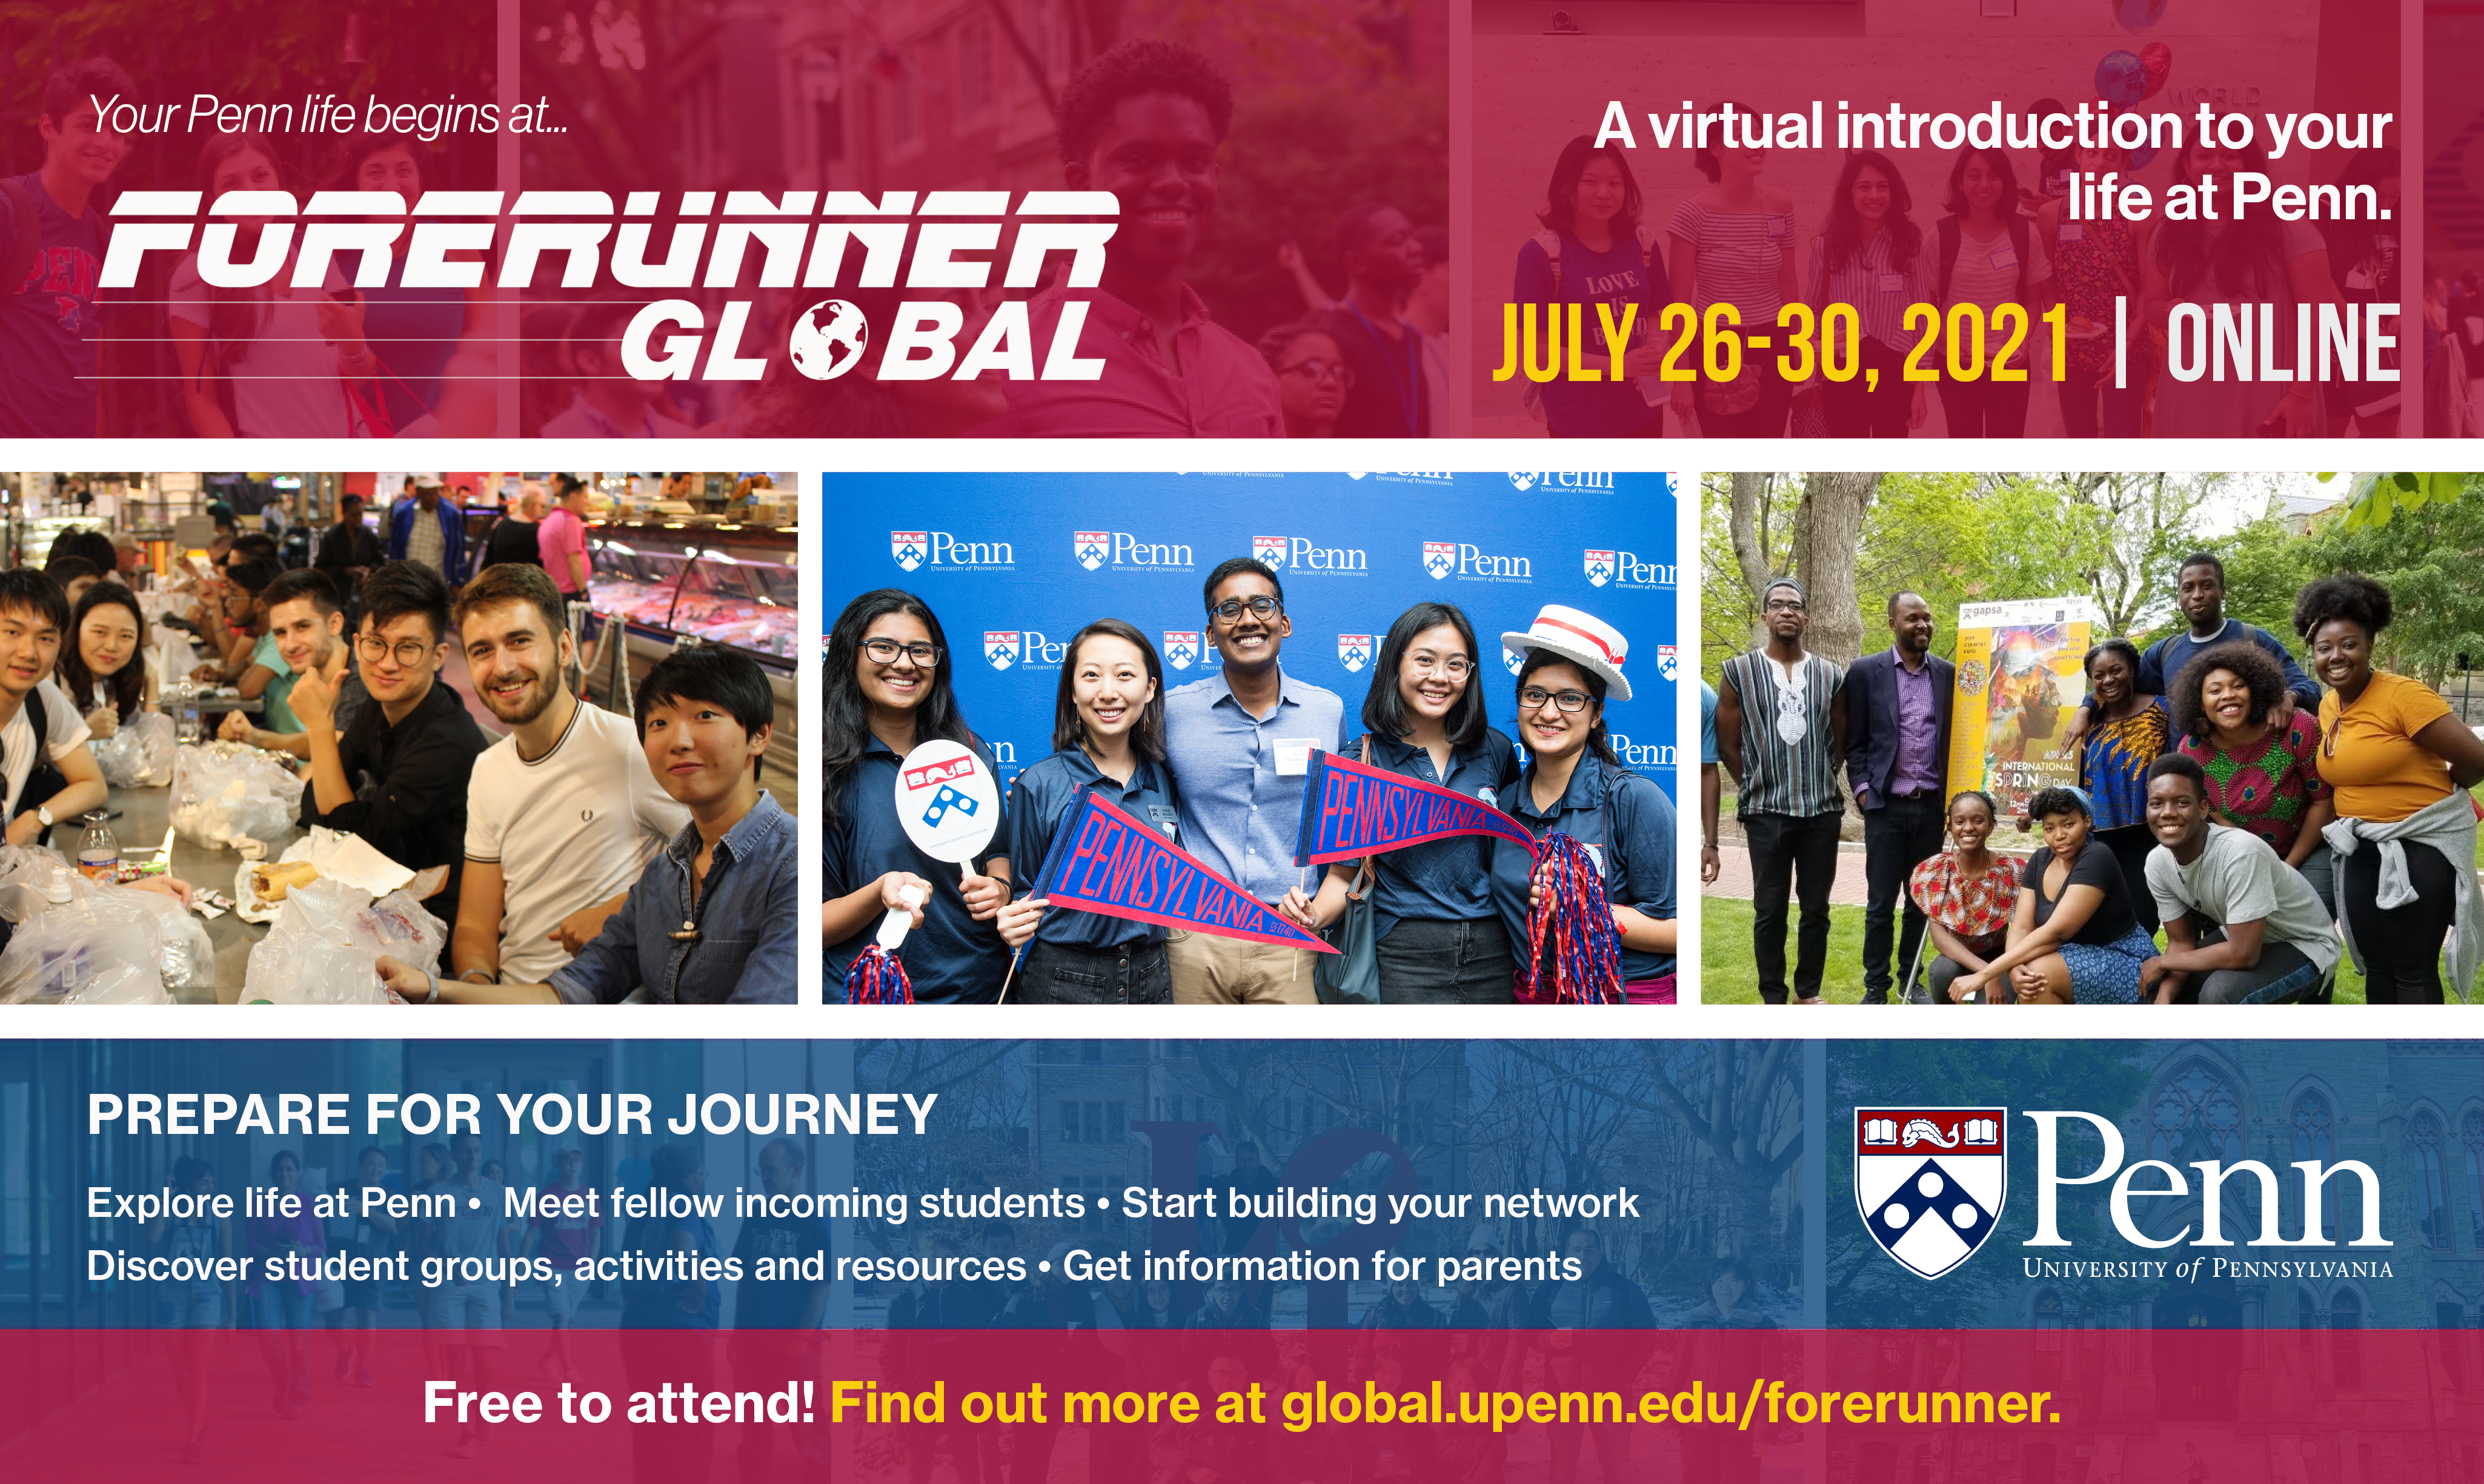 Your life at Penn begins at Forerunner Global! July 26-30, 2021. Prepare for your Journey - explore life at Penn, meet fellow incoming stuidents, start building your network, discover student groups, activities and resources, and get information for parents. Free to attend! More information and registration link below.